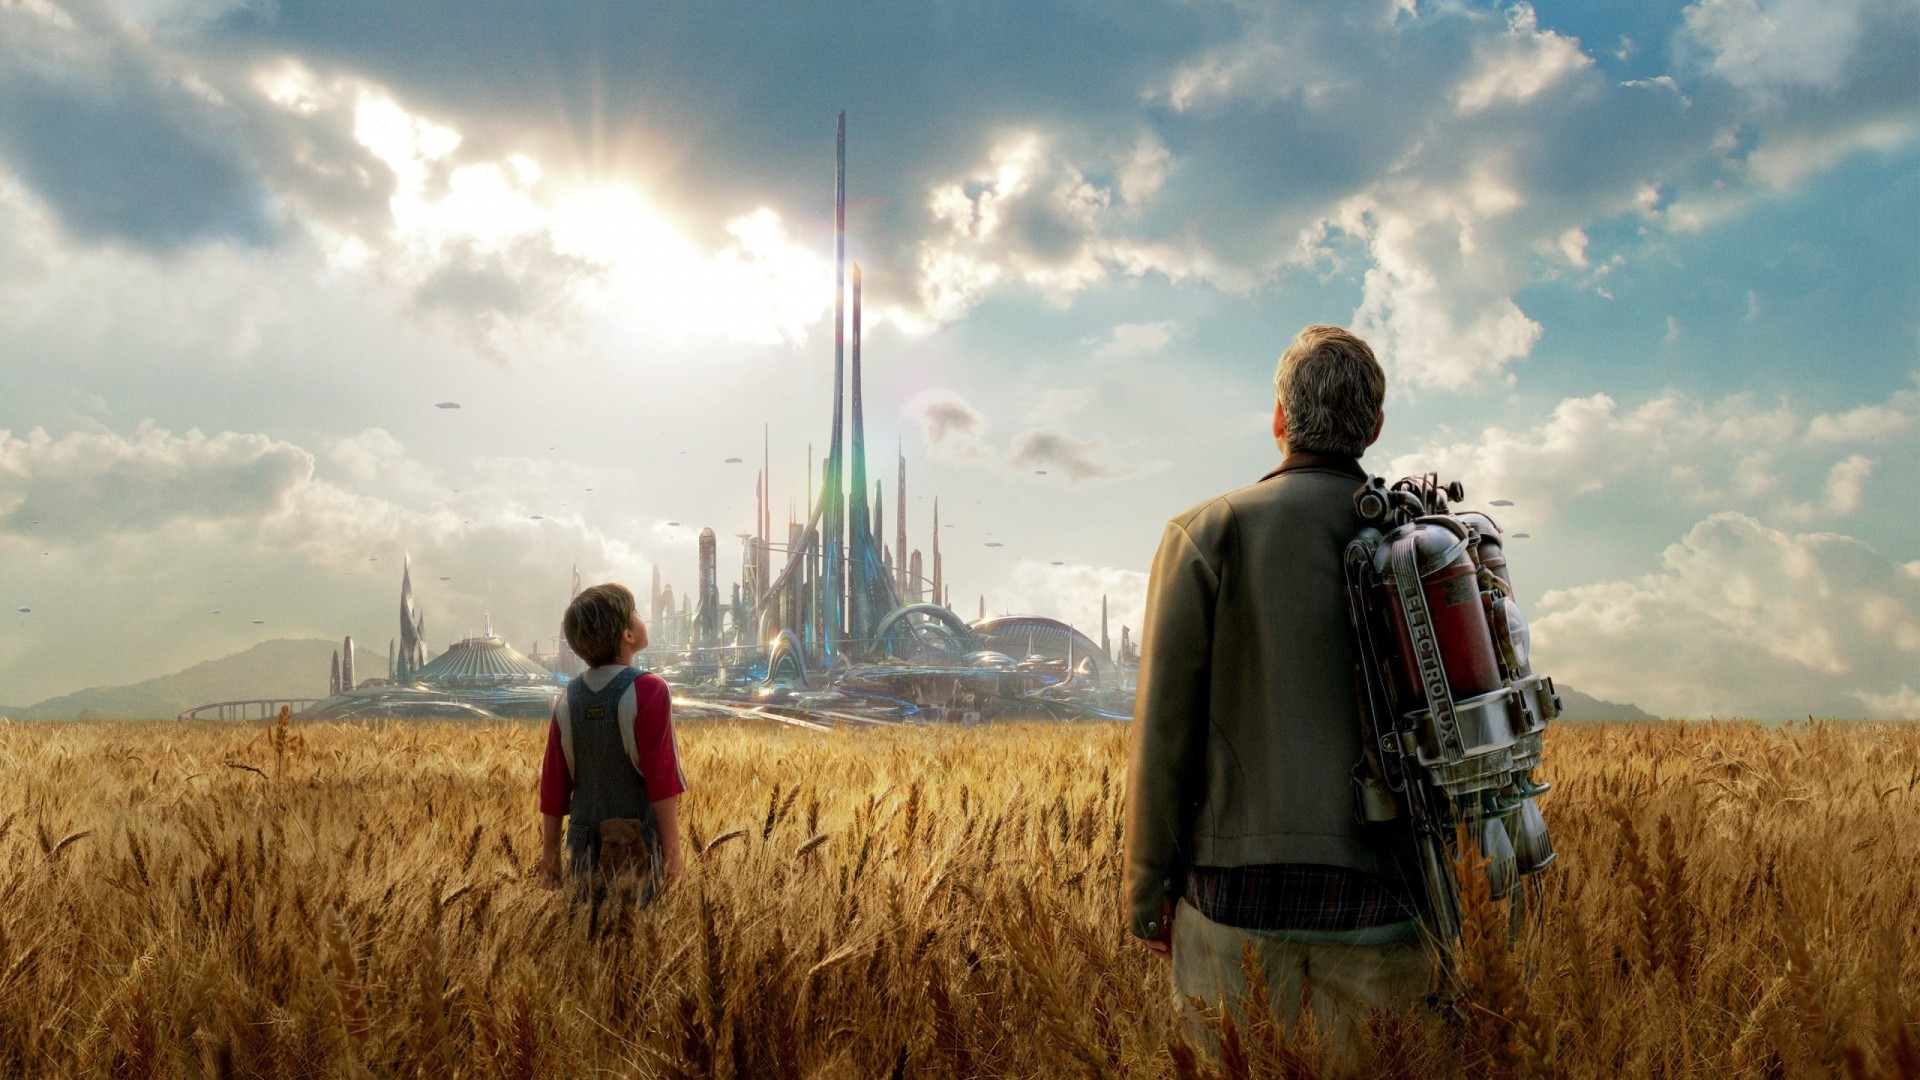 1920x1080  Tomorrowland Movie Still. How to set wallpaper on your desktop?  Click the download link from above and set the wallpaper on the desktop  from your ...